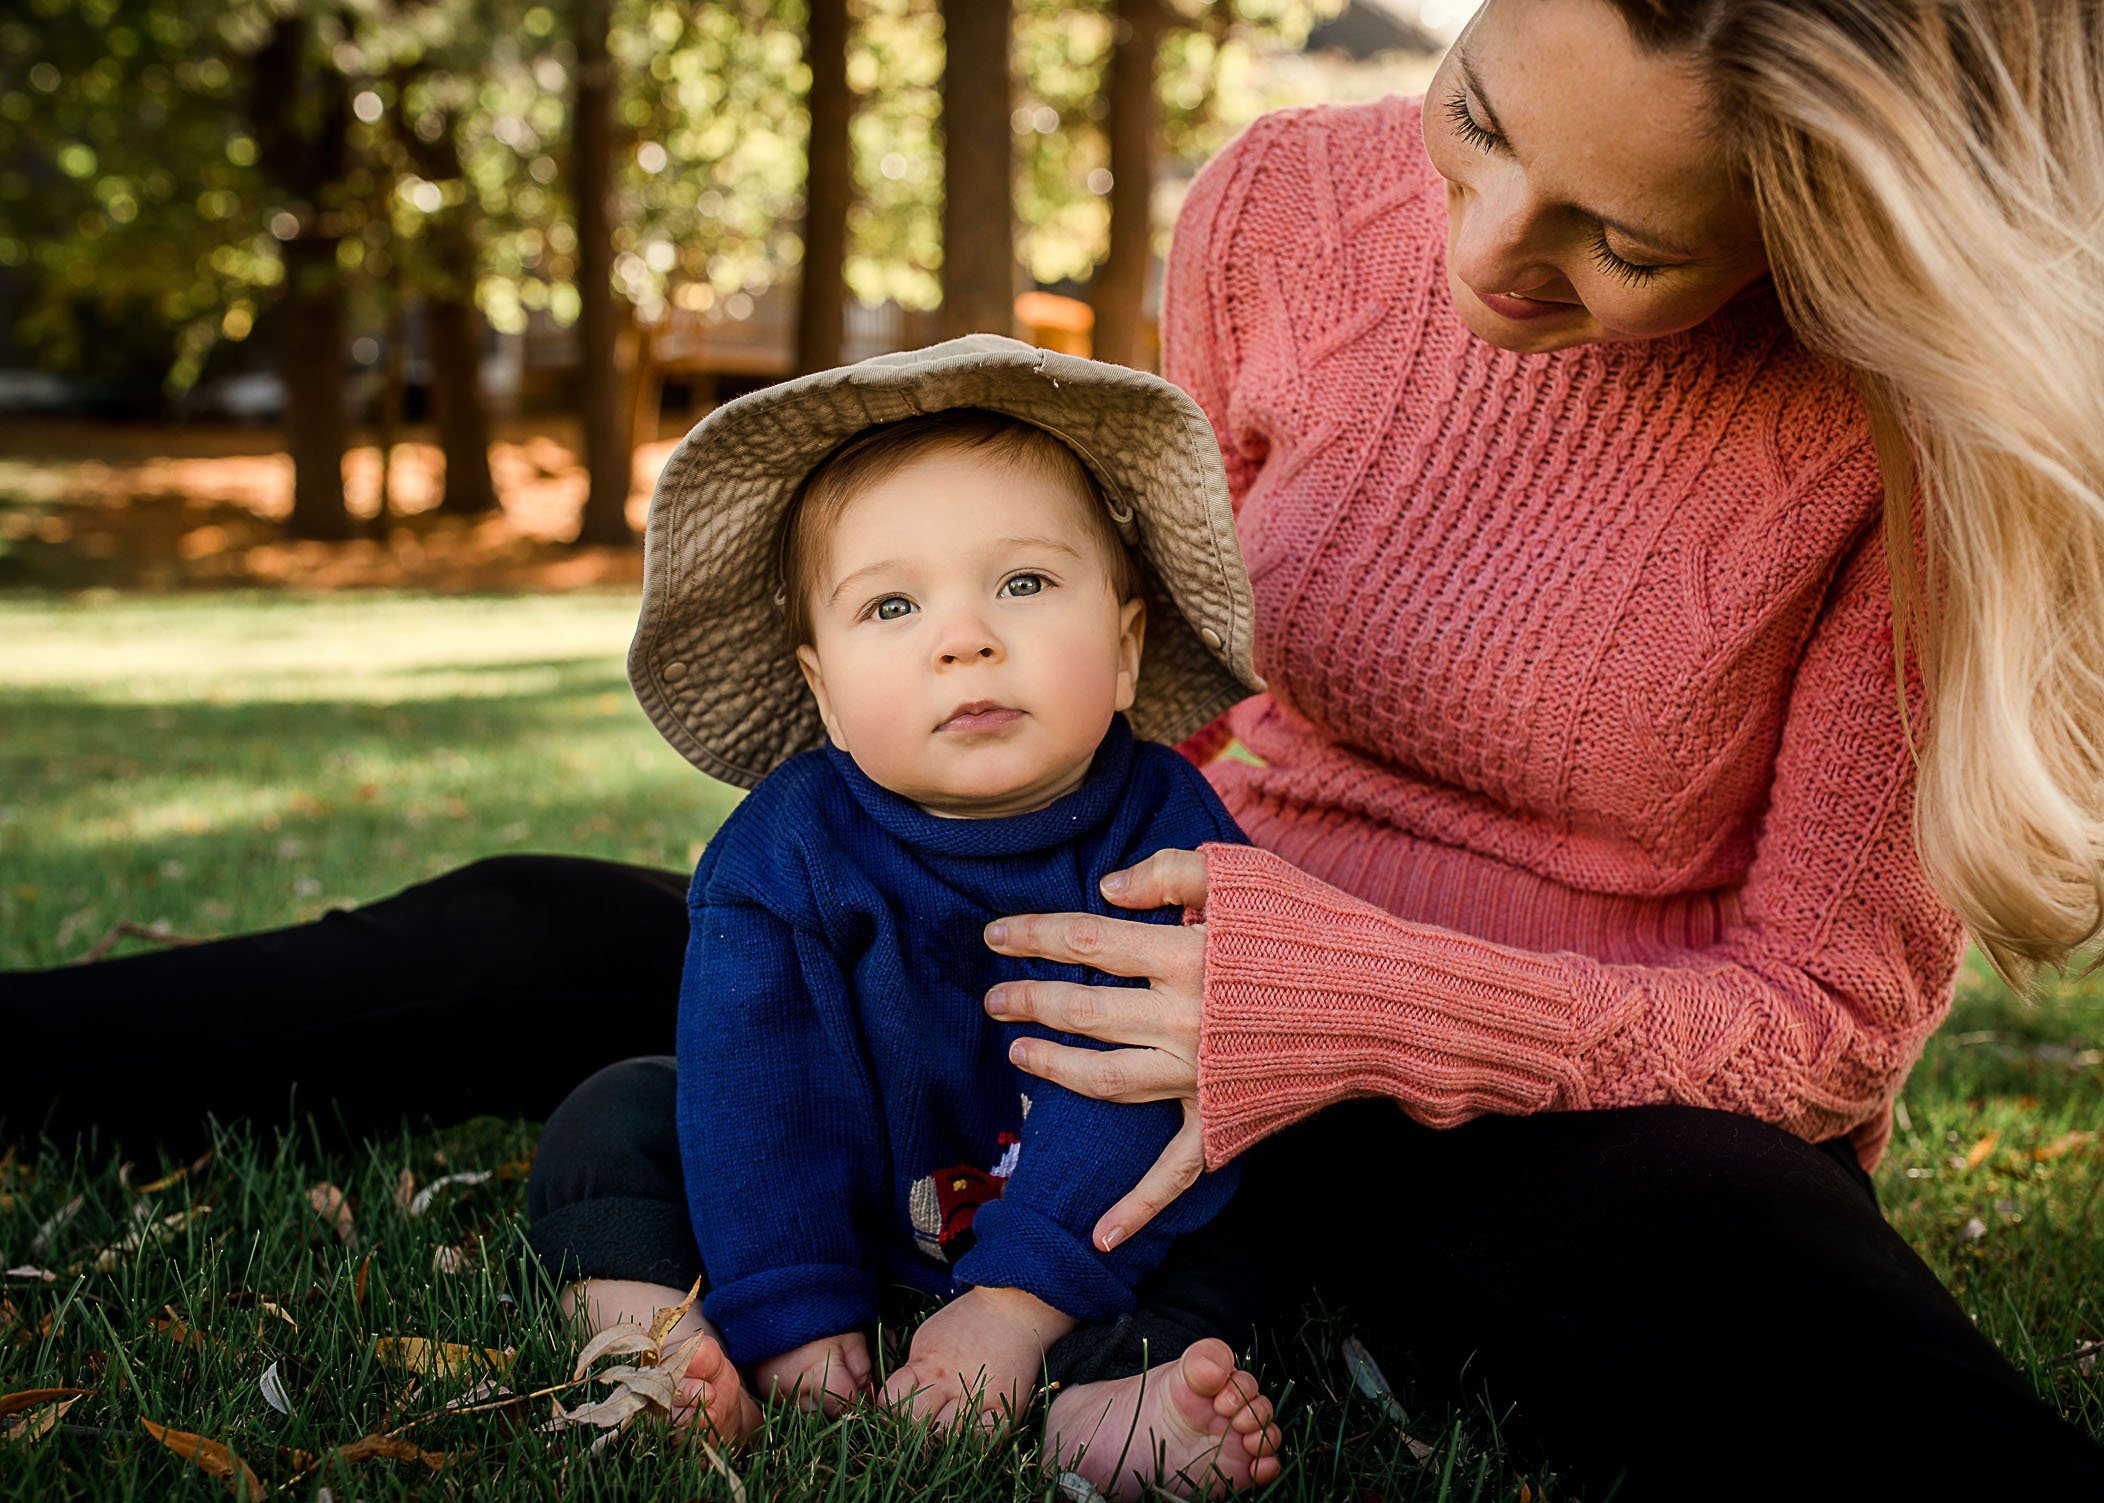 6 mo old baby boy sitting in grass with Mom with floppy hat on One Big Happy Photo